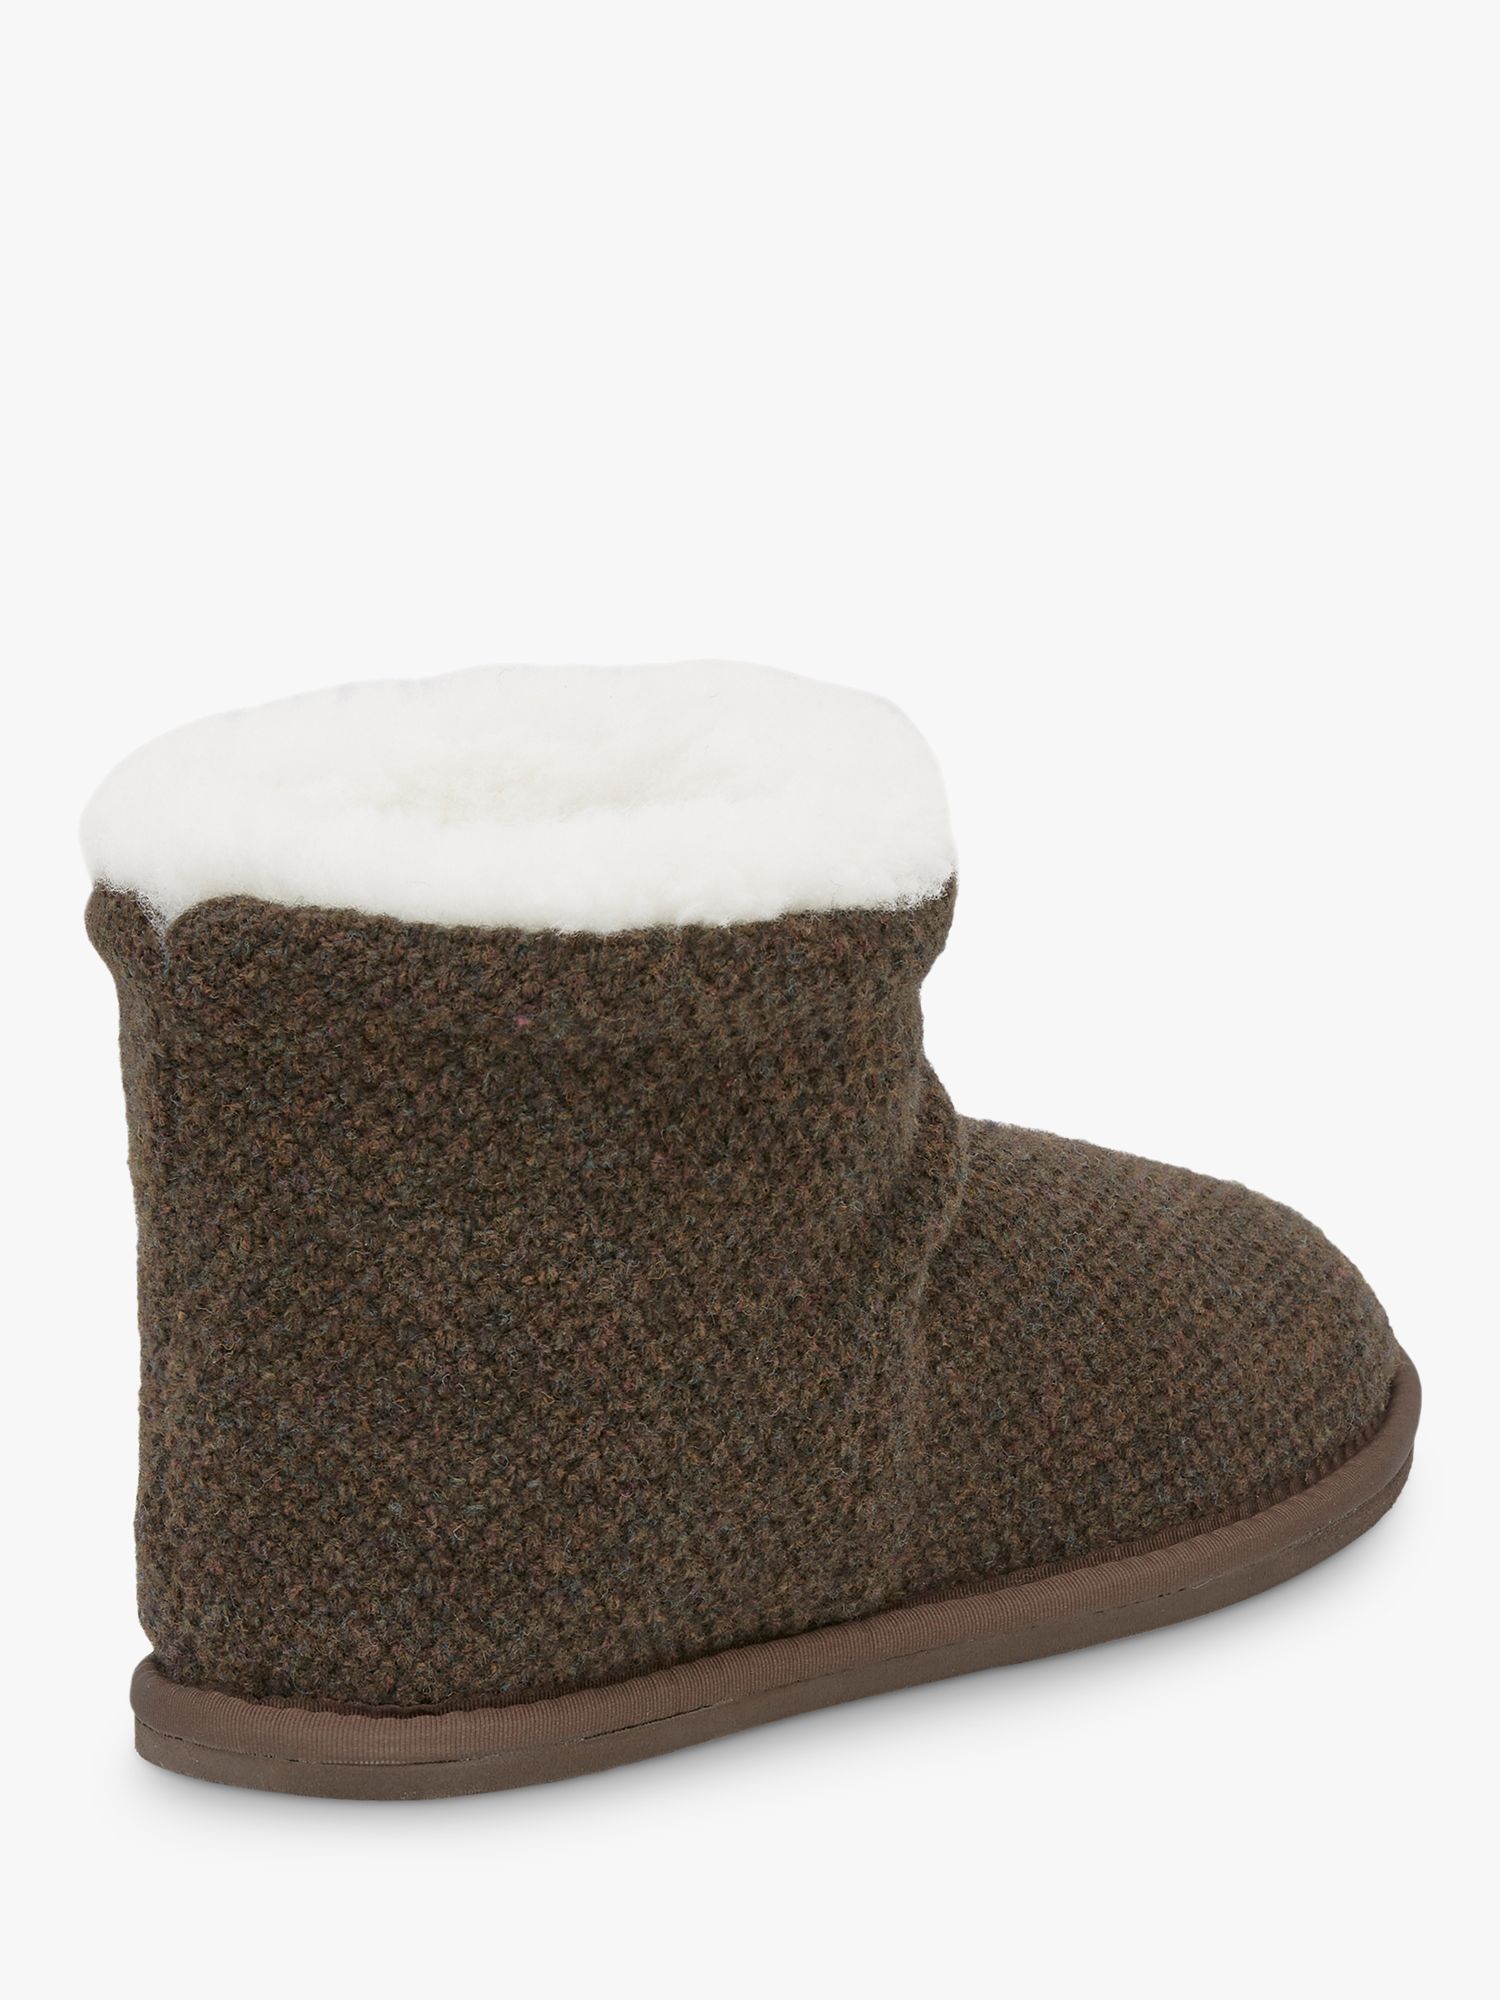 Celtic & Co. Knitted Sheepskin Shortie Slippers, Tanners Brown, 8